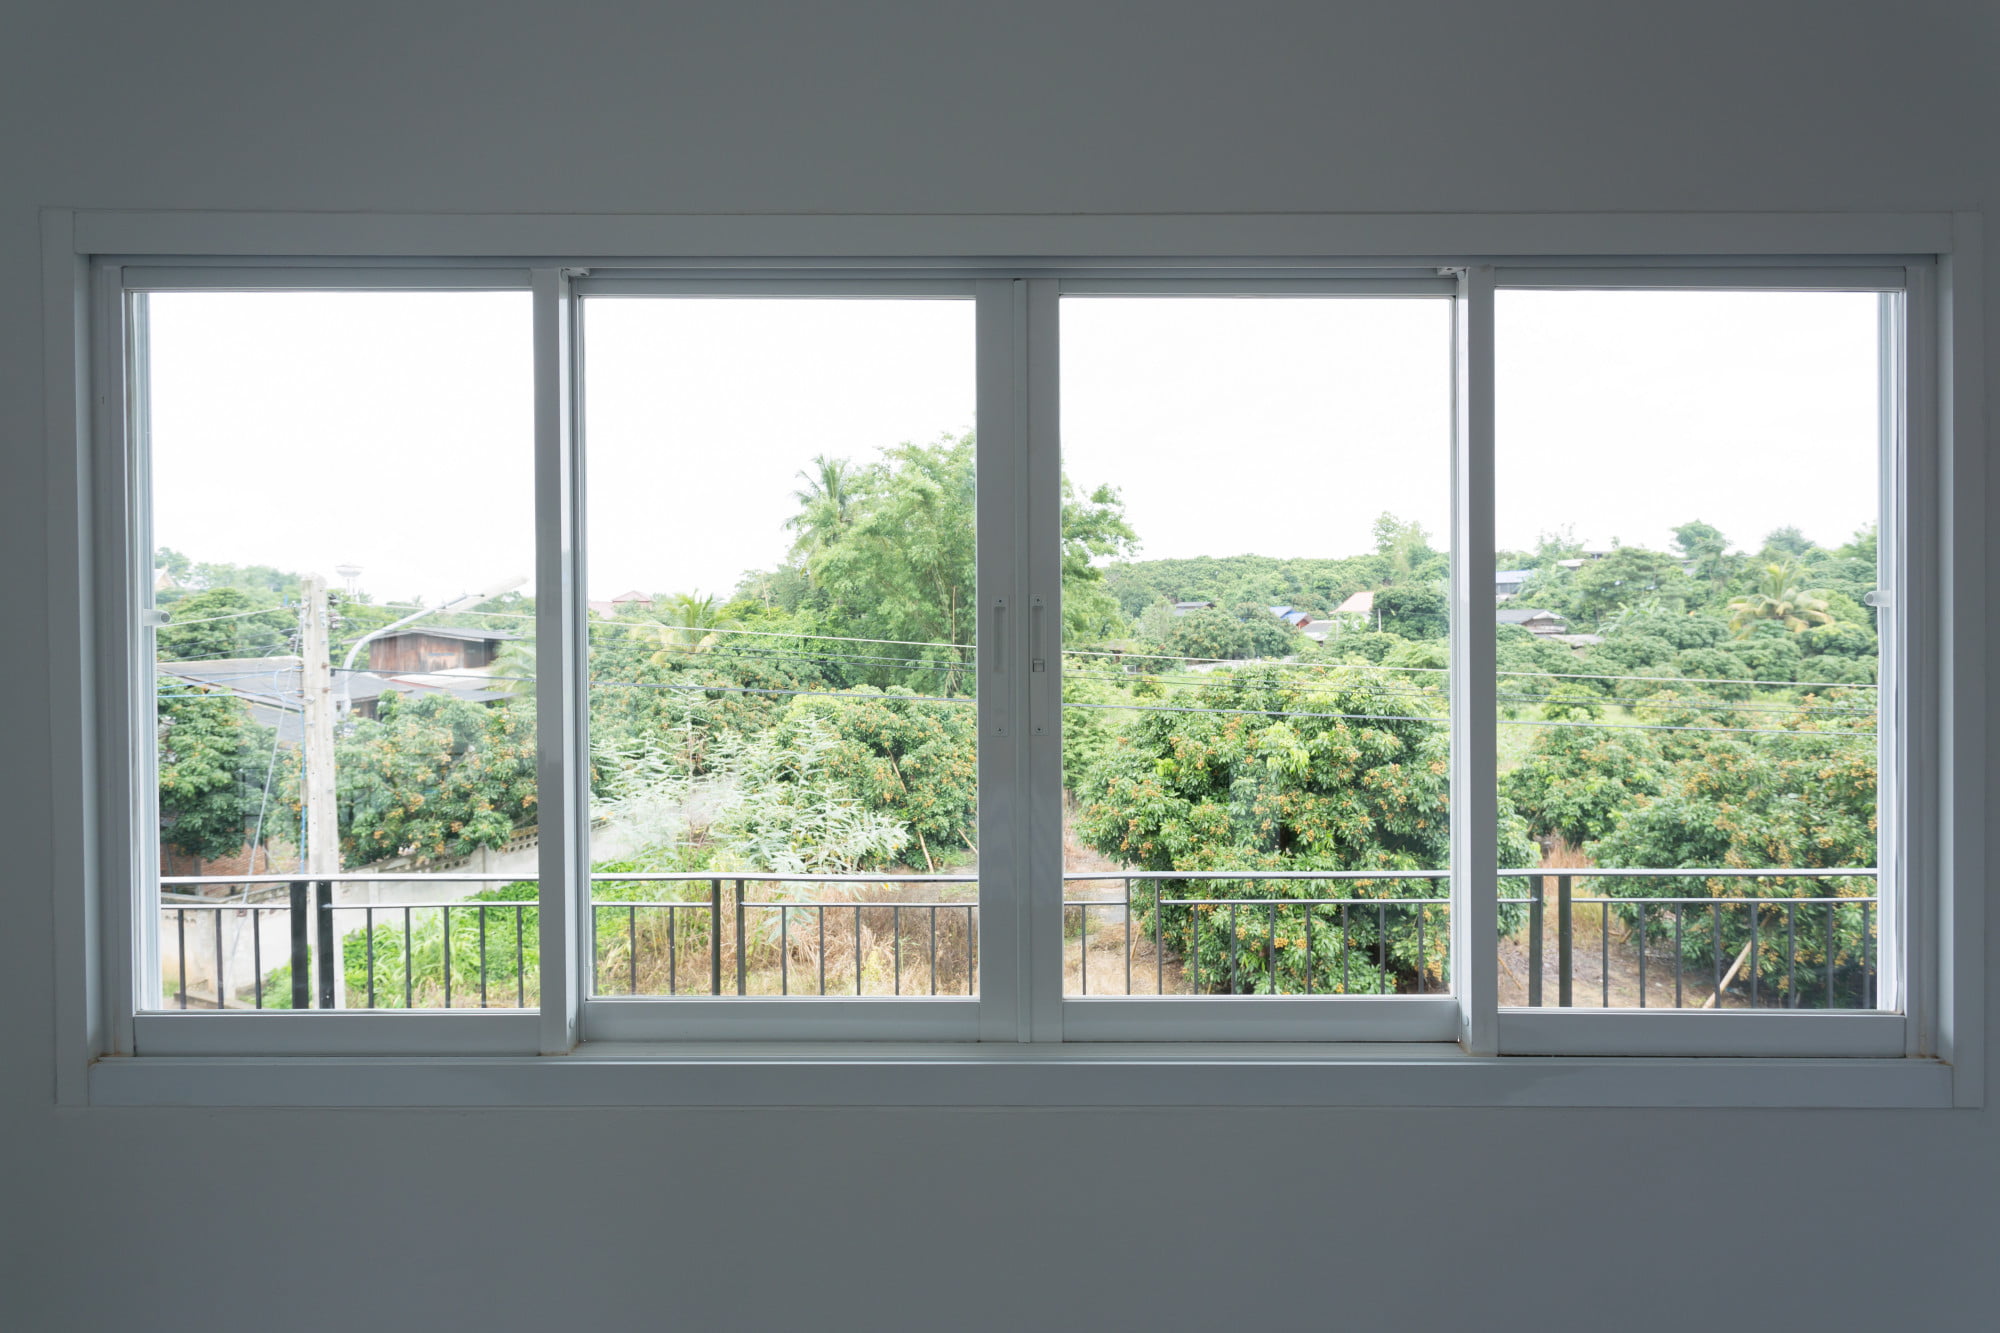 Energy-efficient windows can help you insulate your home's heating system to save you money every month. Read on for more information.